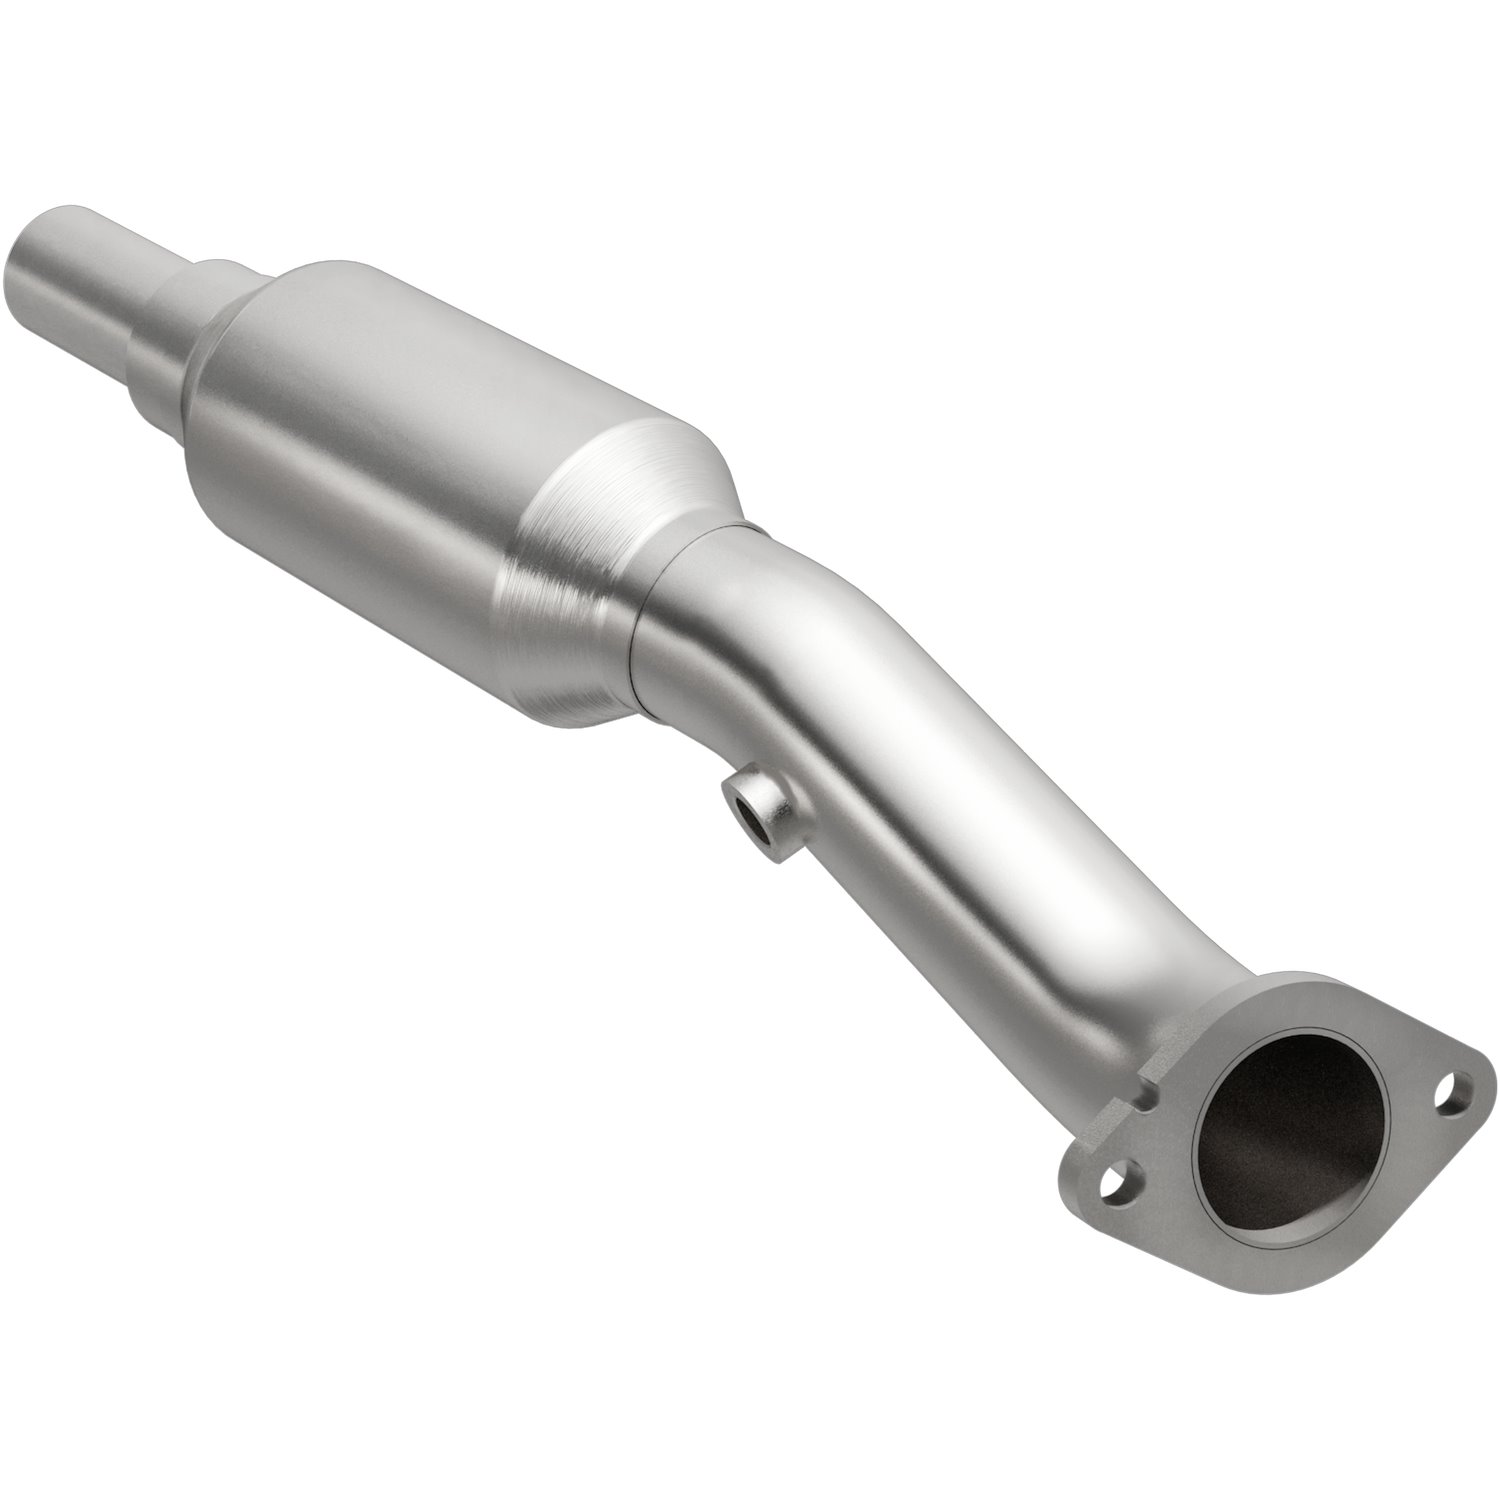 OEM Grade Federal / EPA Compliant Direct-Fit Catalytic Converter 49501